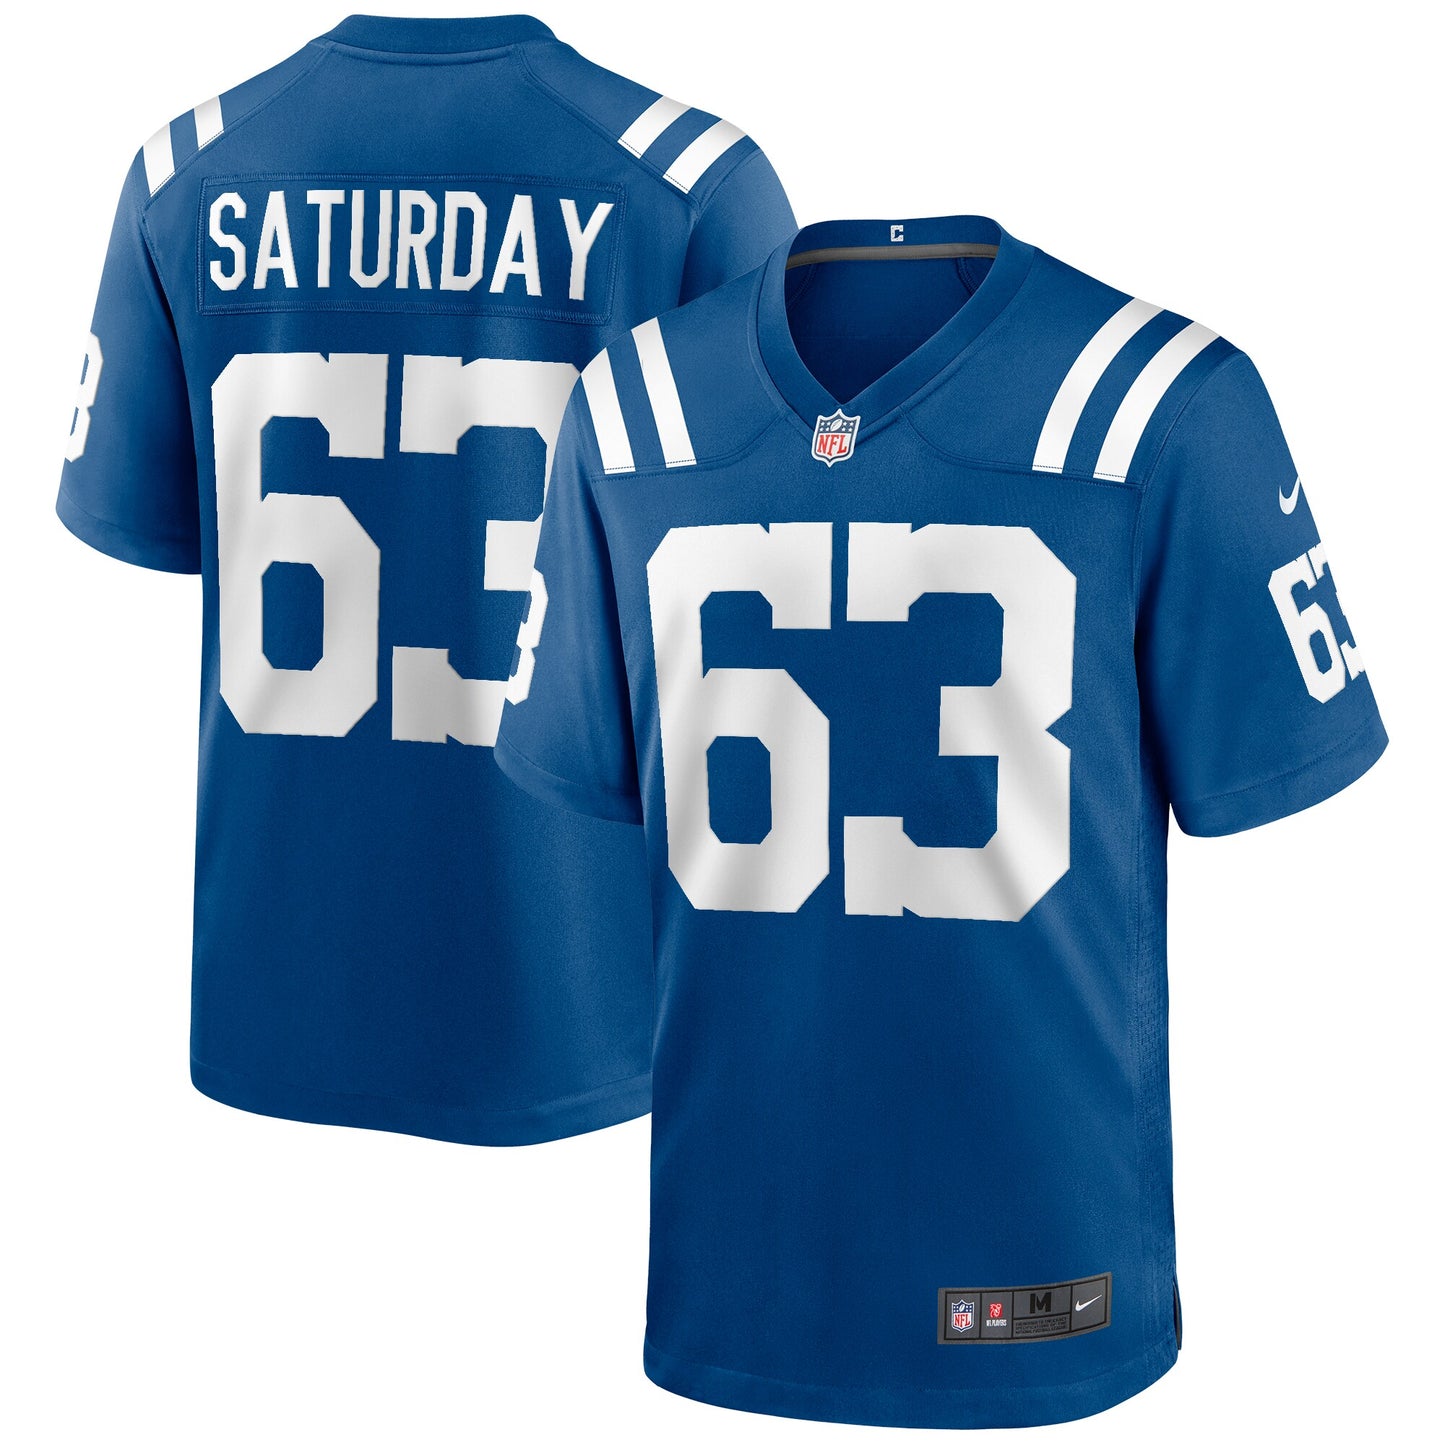 Jeff Saturday Indianapolis Colts Nike Game Retired Player Jersey - Royal